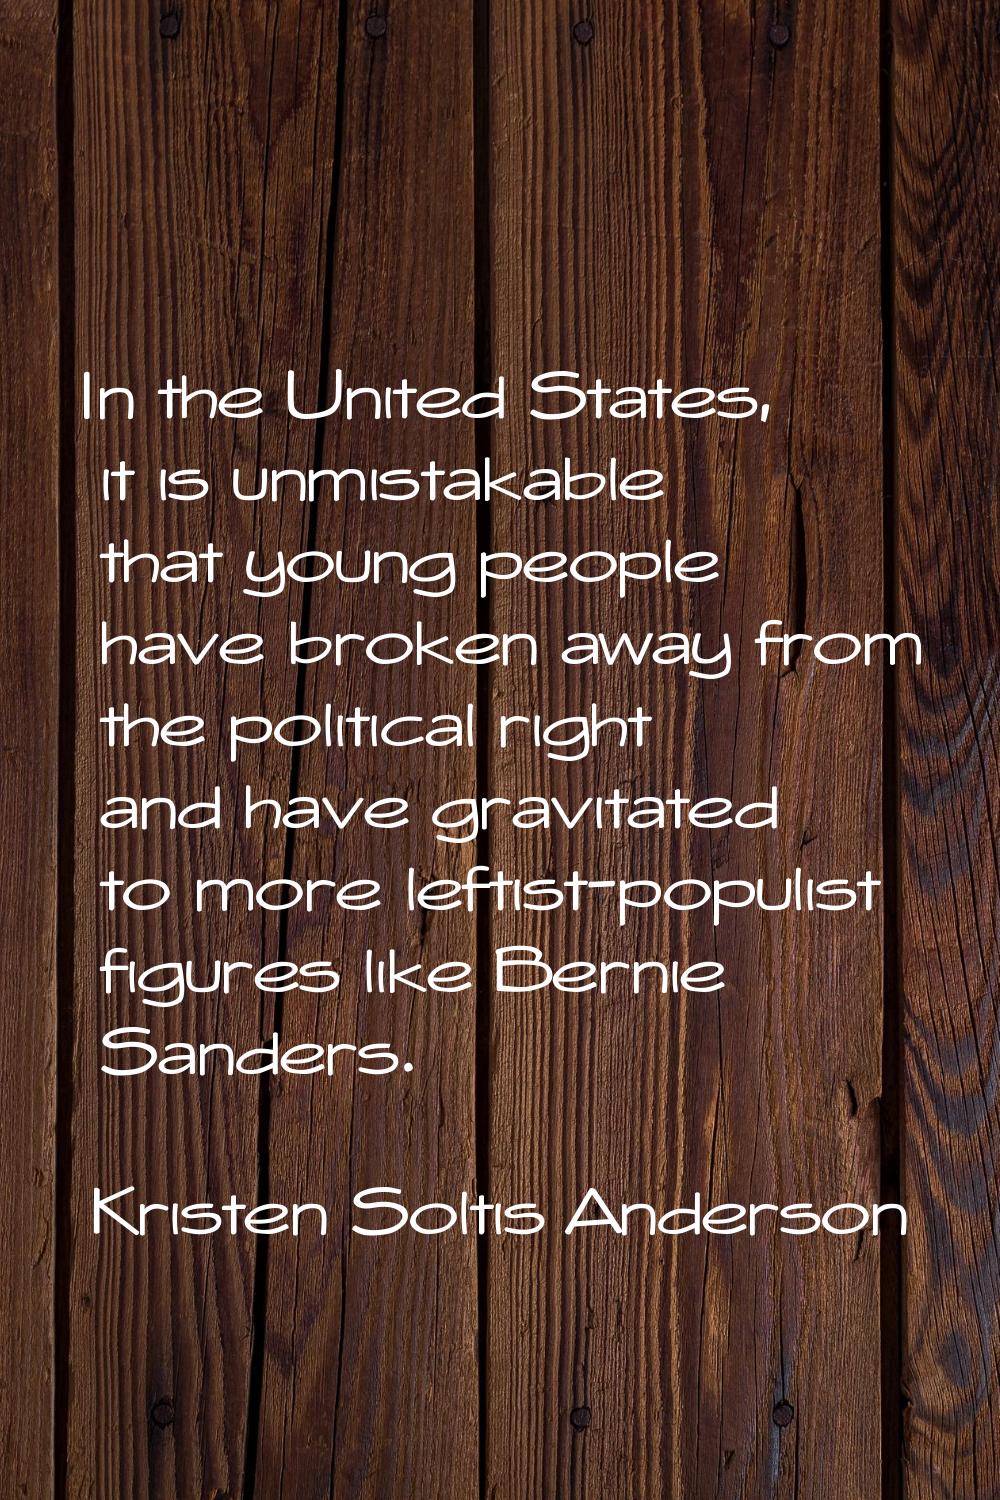 In the United States, it is unmistakable that young people have broken away from the political righ